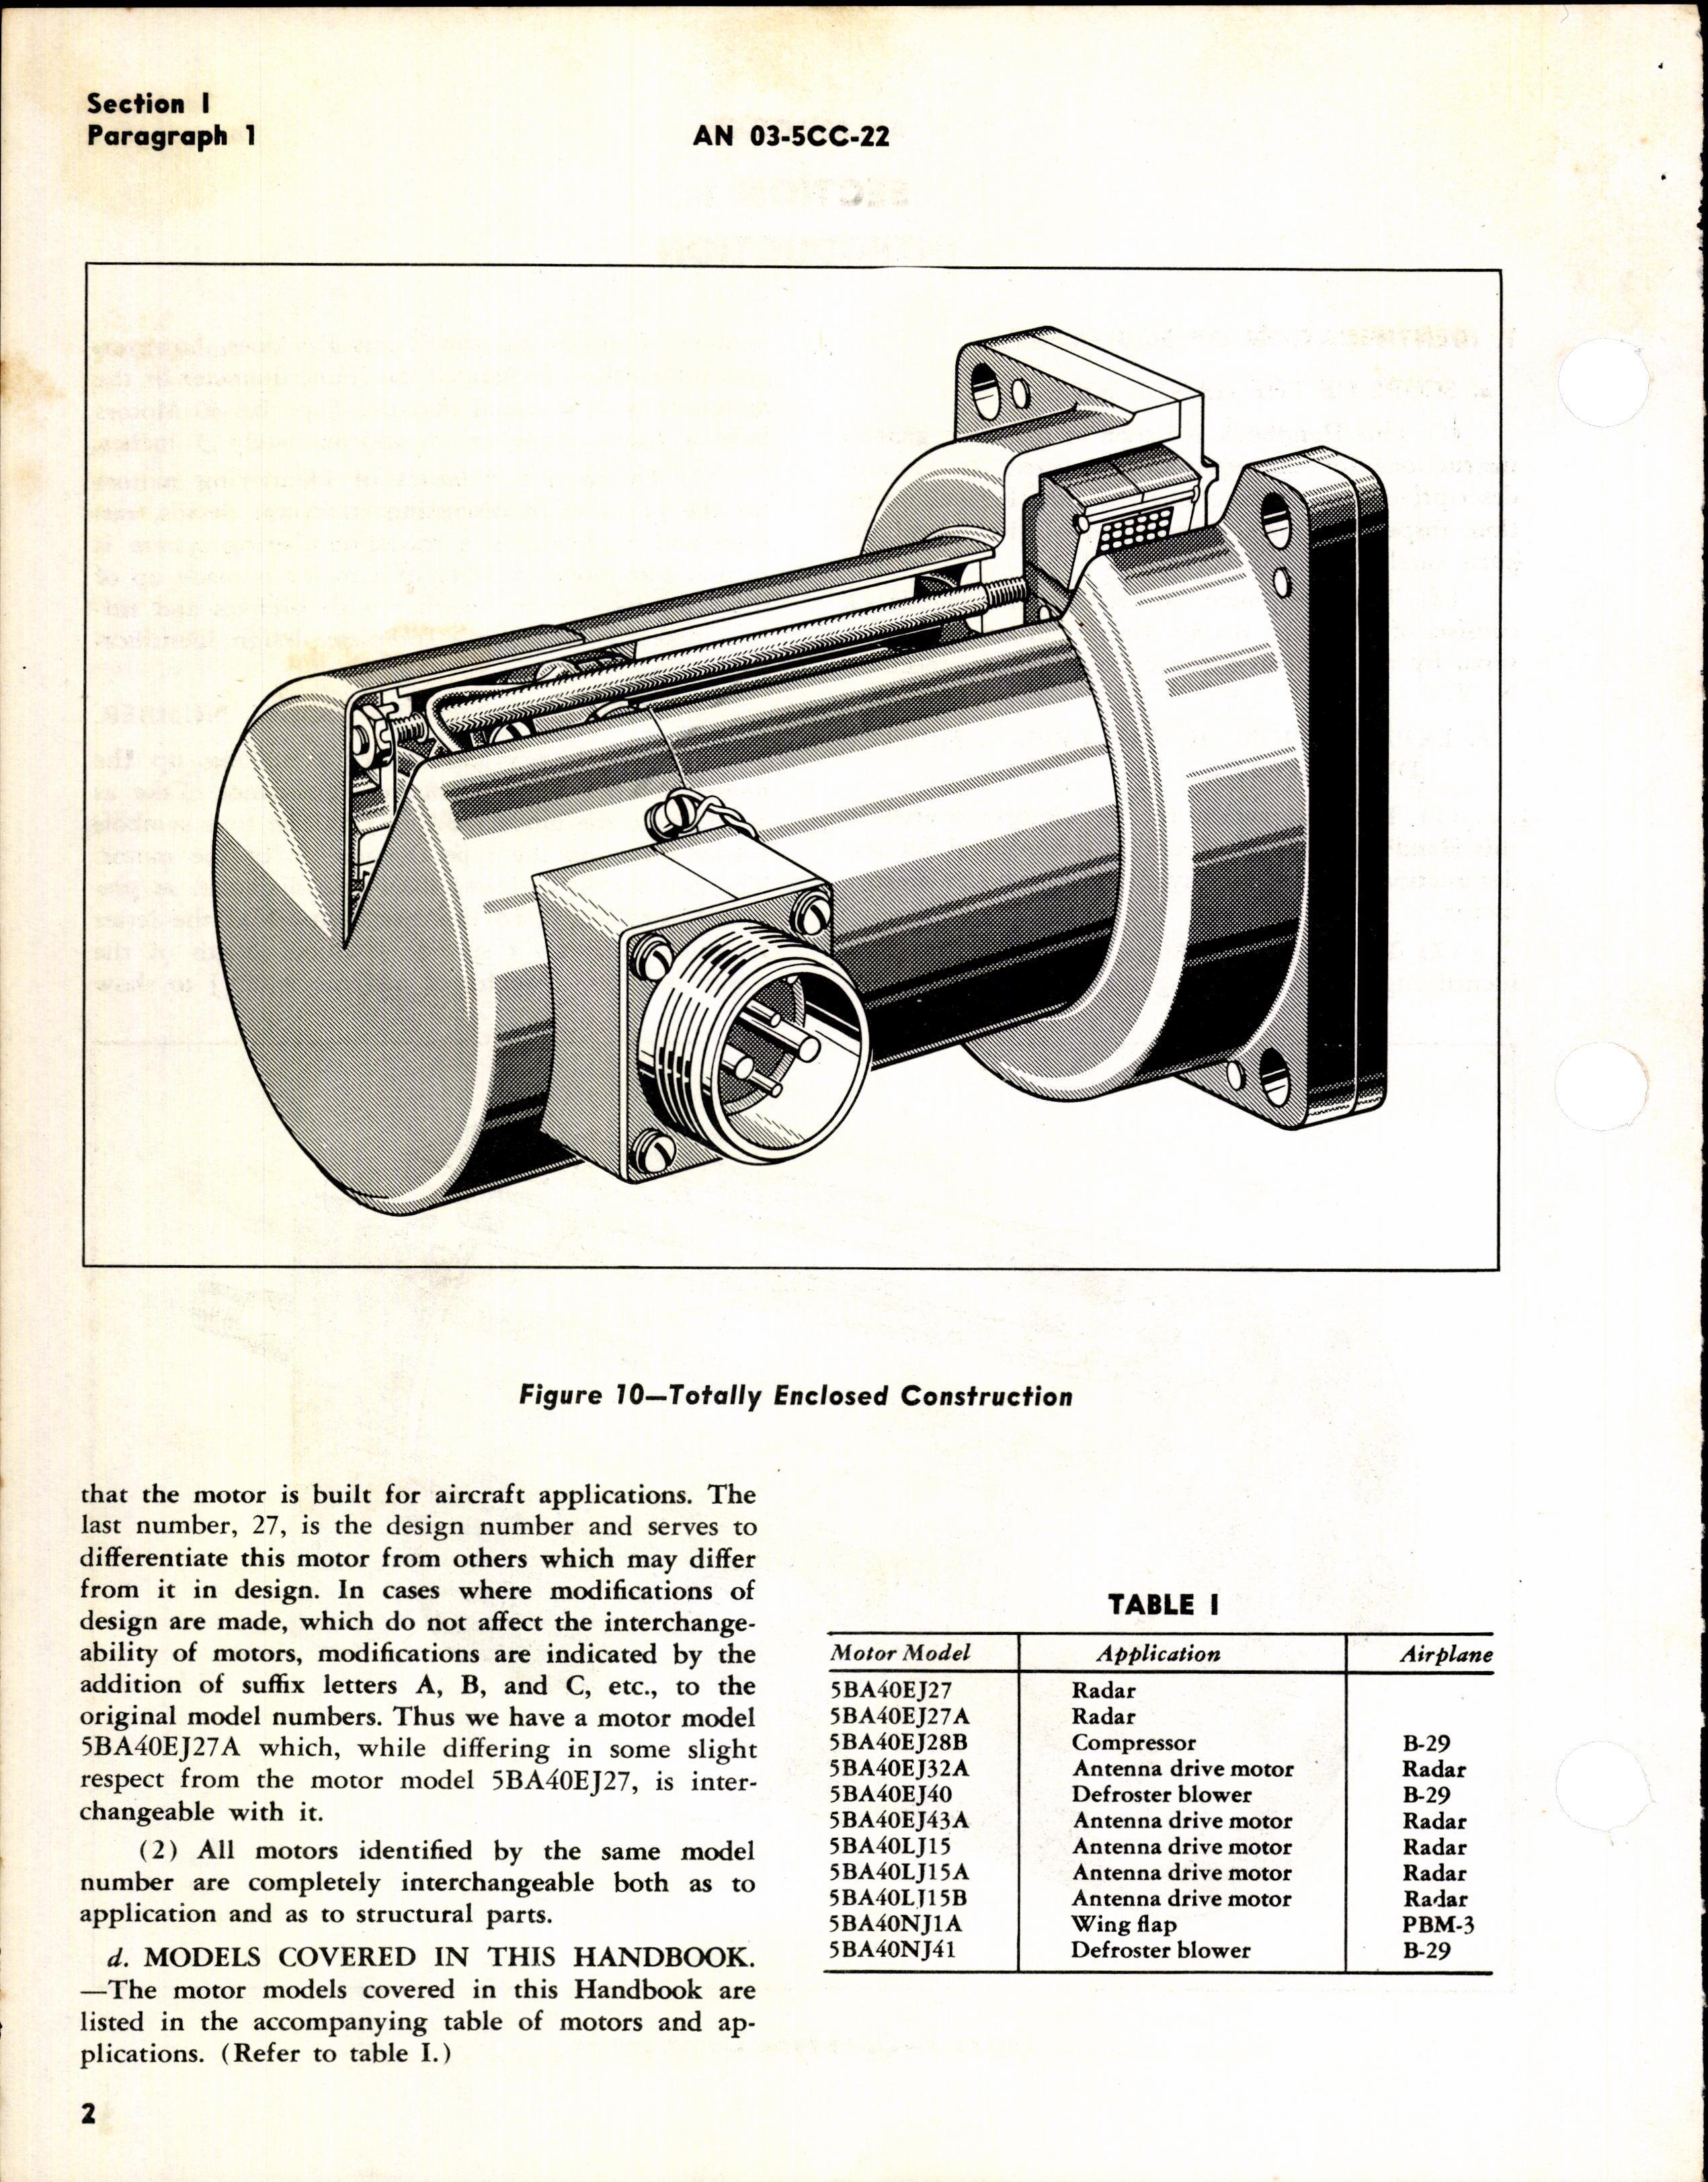 Sample page 4 from AirCorps Library document: Handbook of Instructions with Parts Catalog for Model 5BA50 Series Electric Motors